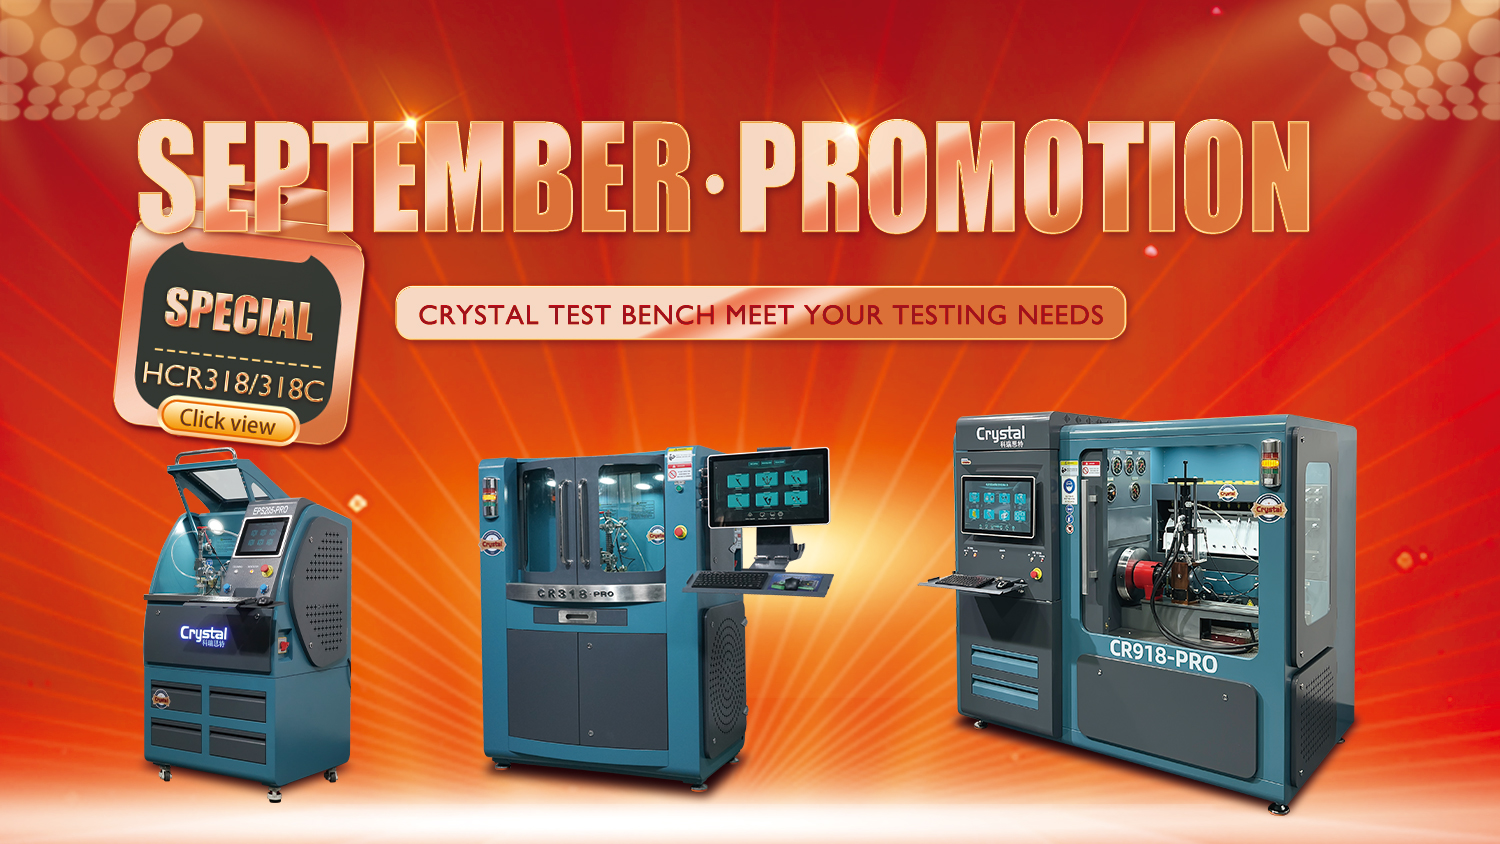 Promotion of crystal common rail test bench in september